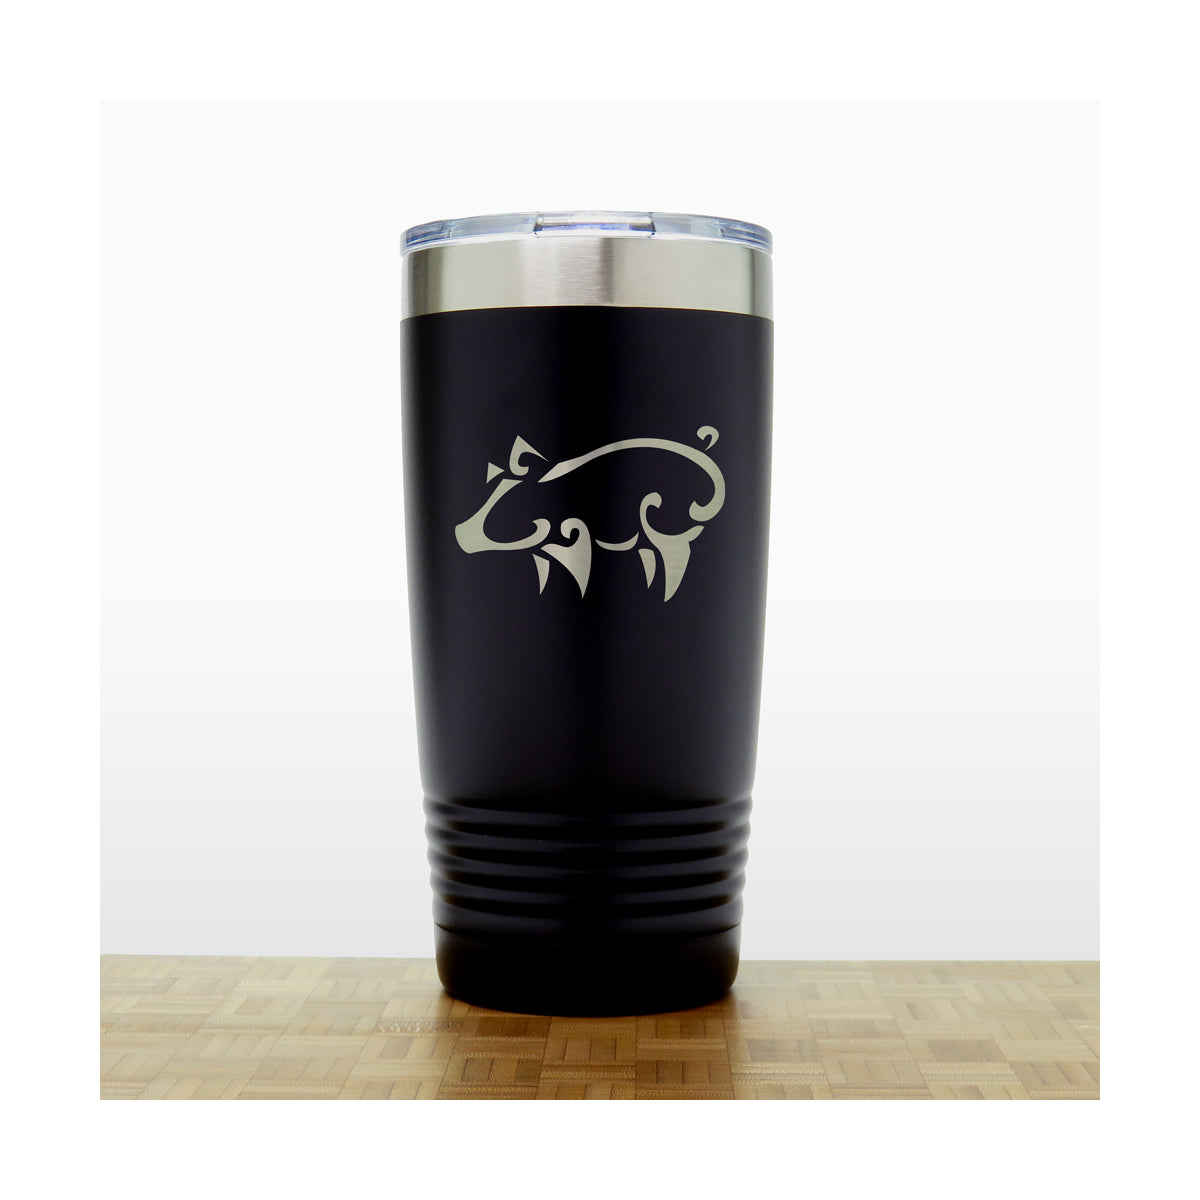 Black - Pig 3 20 oz Insulated Tumbler - Copyright Hues in Glass